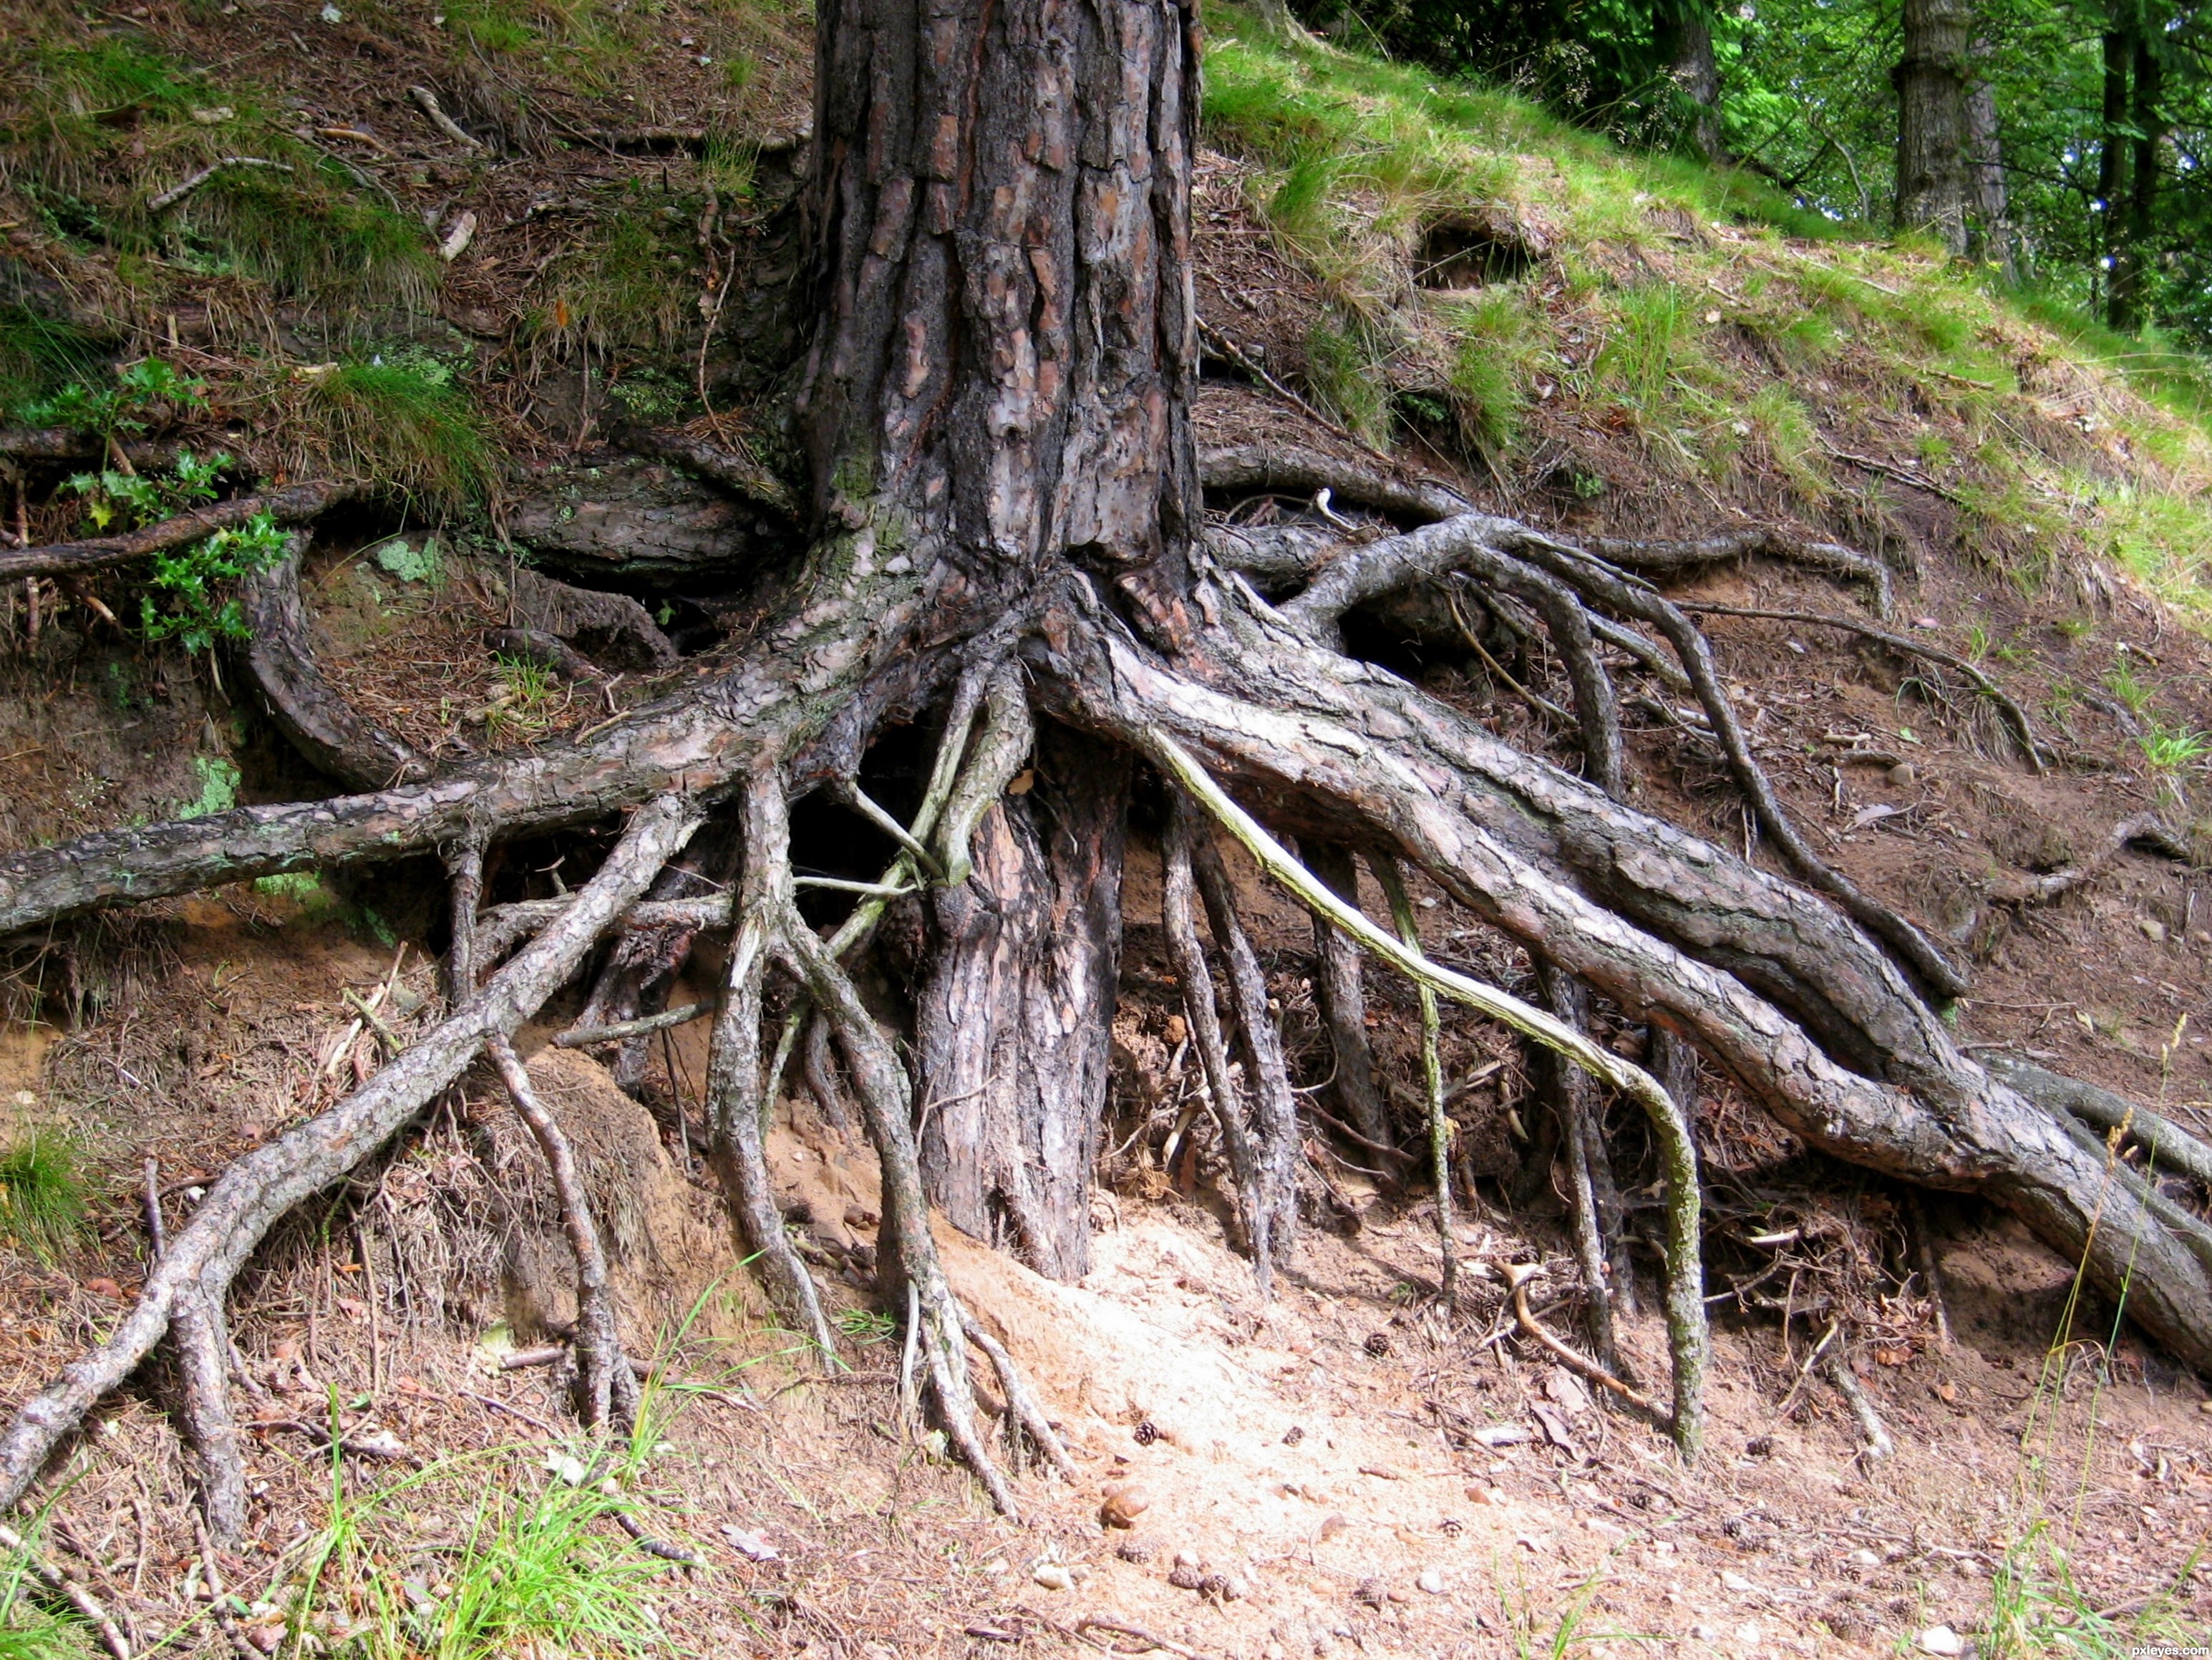 Creepy Roots picture, by jeaniblog for: tree roots photography ...